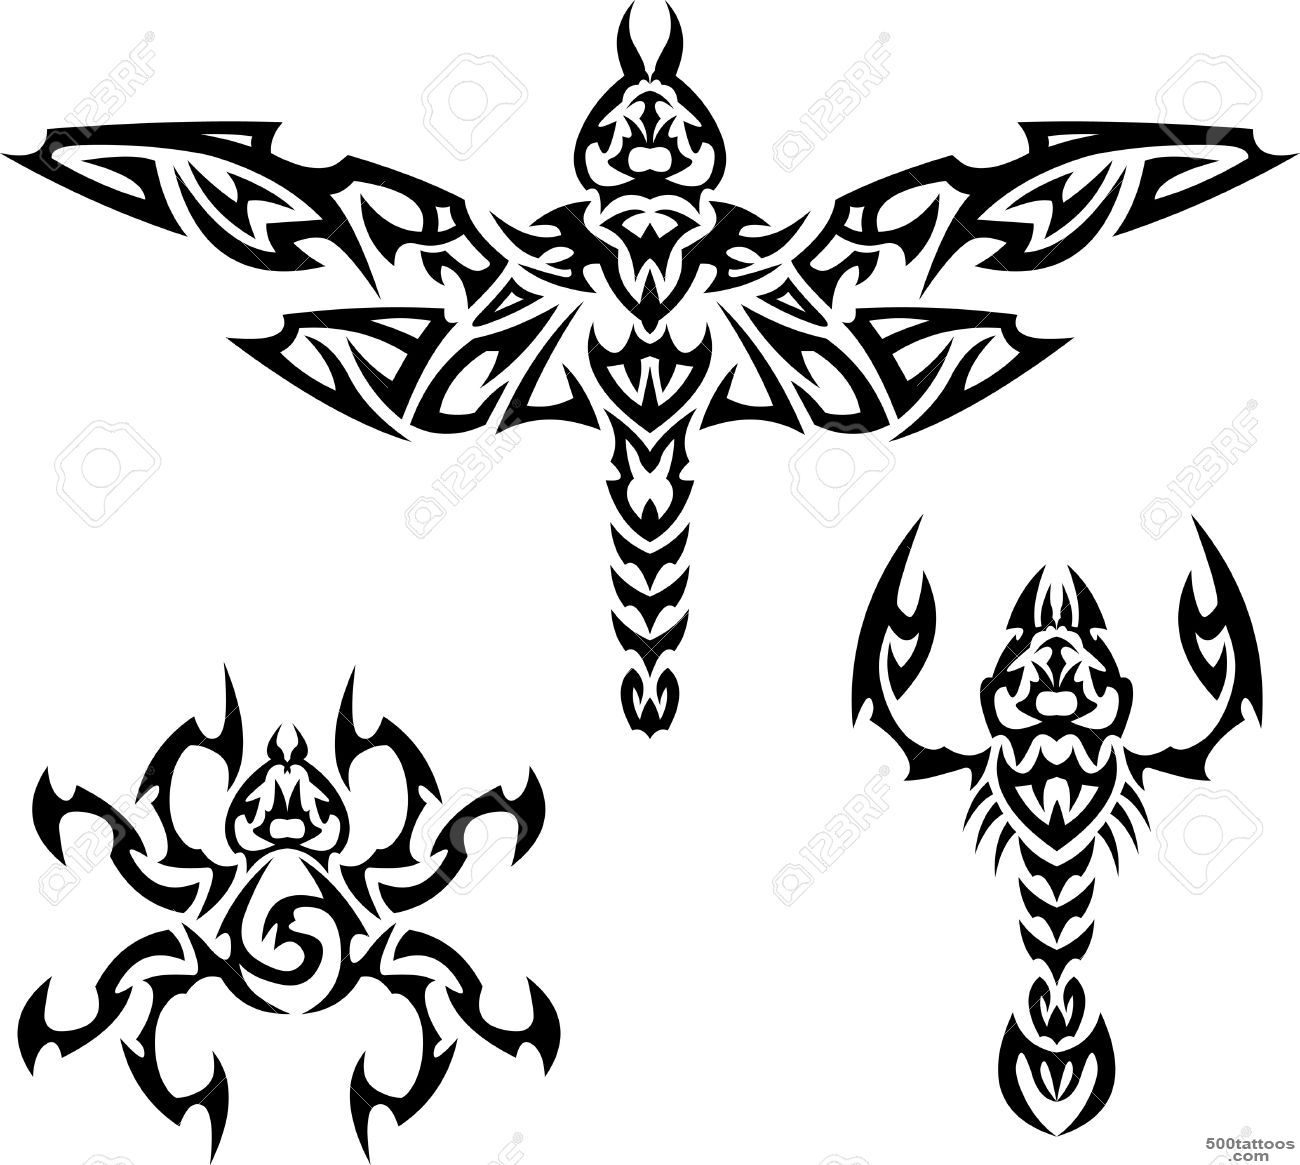 Tattoos Insects Royalty Free Cliparts, Vectors, And Stock ..._42